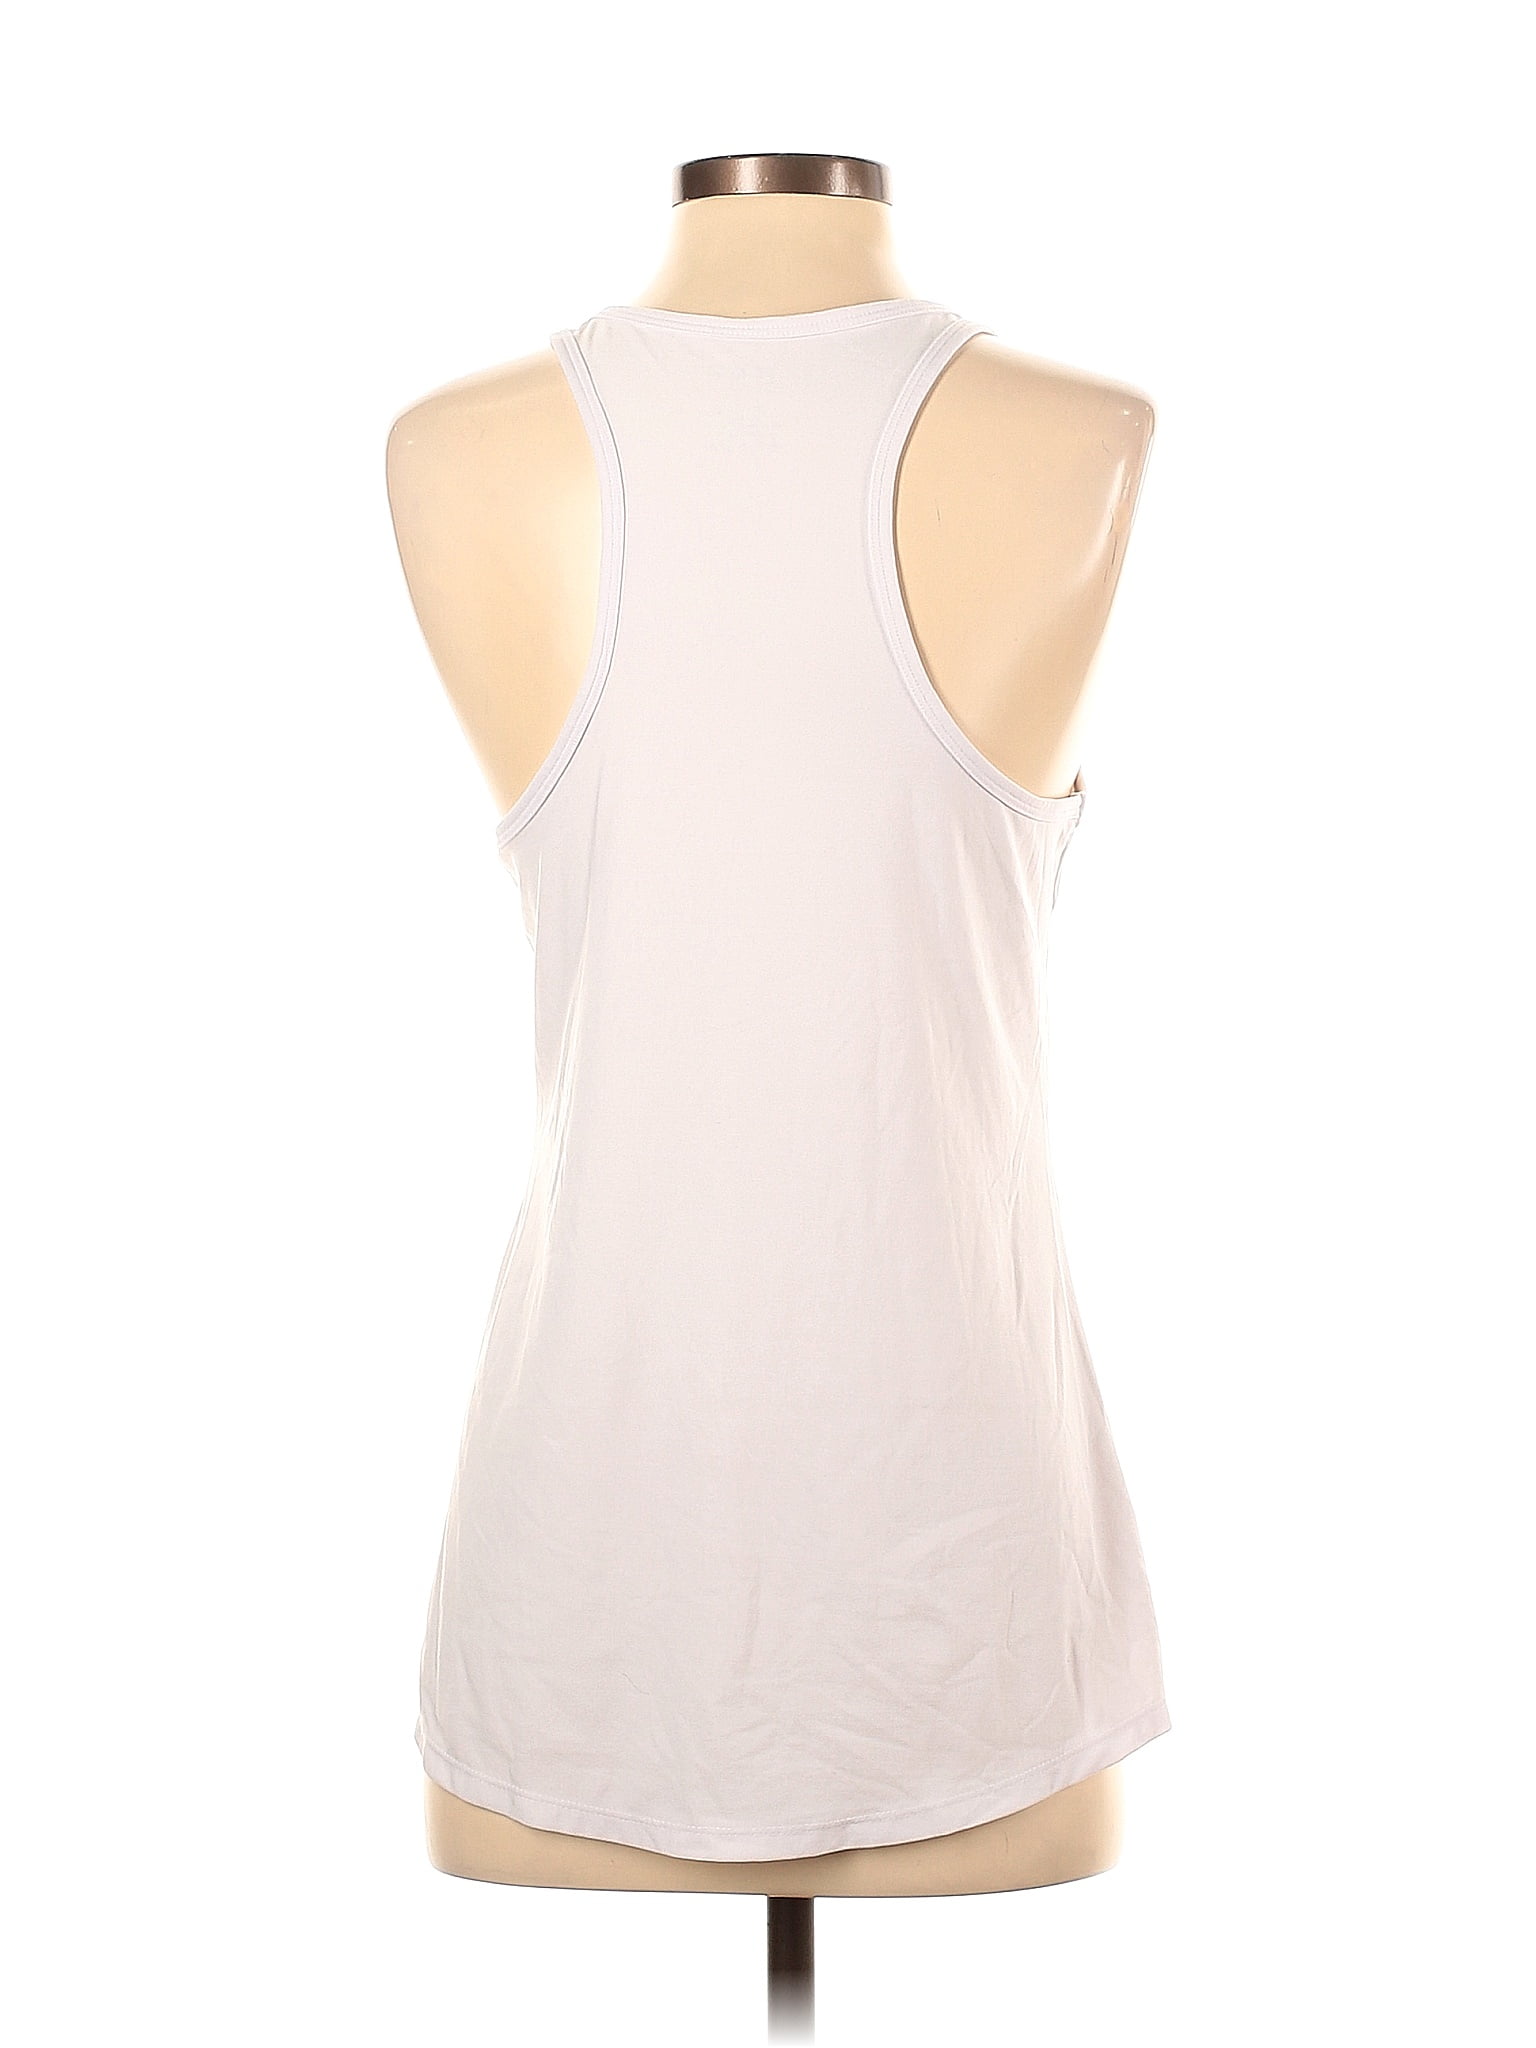 Vogo Athletica Women's Top With Build Size M